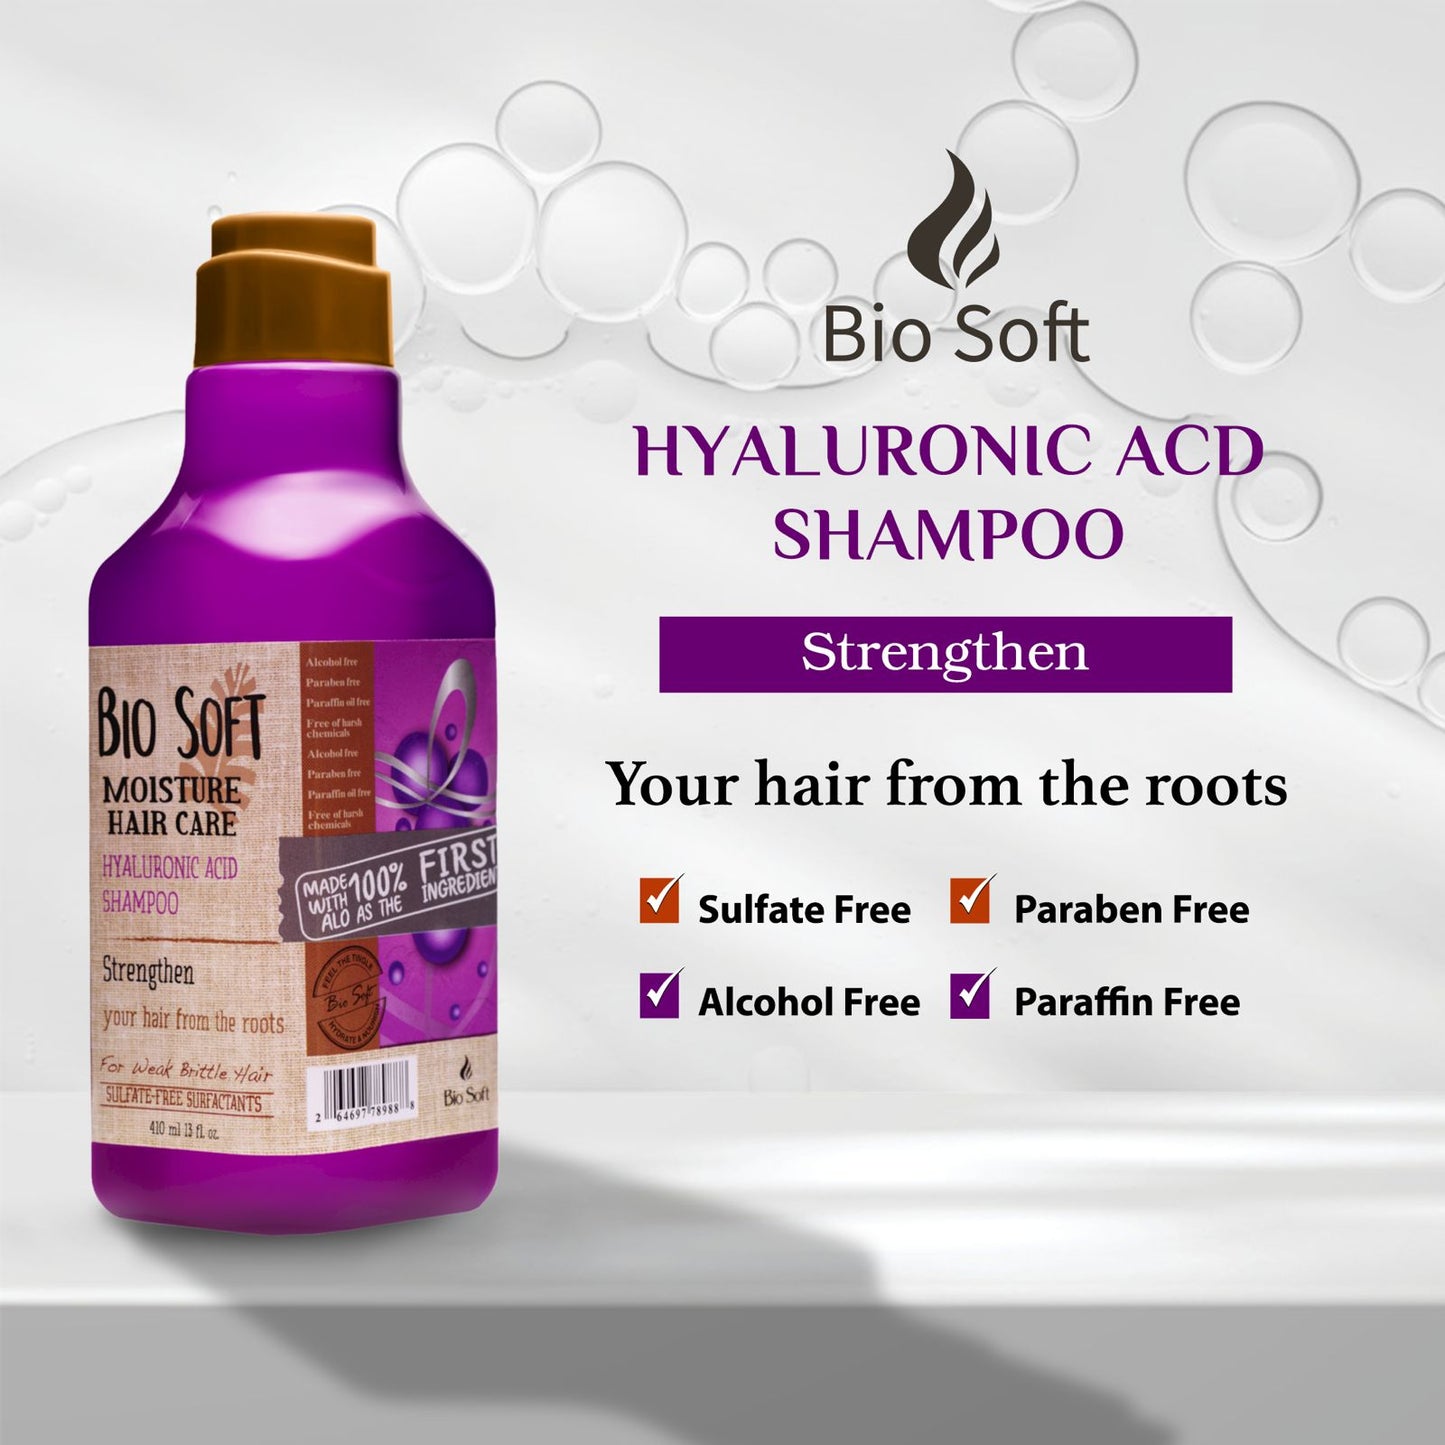 Shampoo with Hyaluronic acid